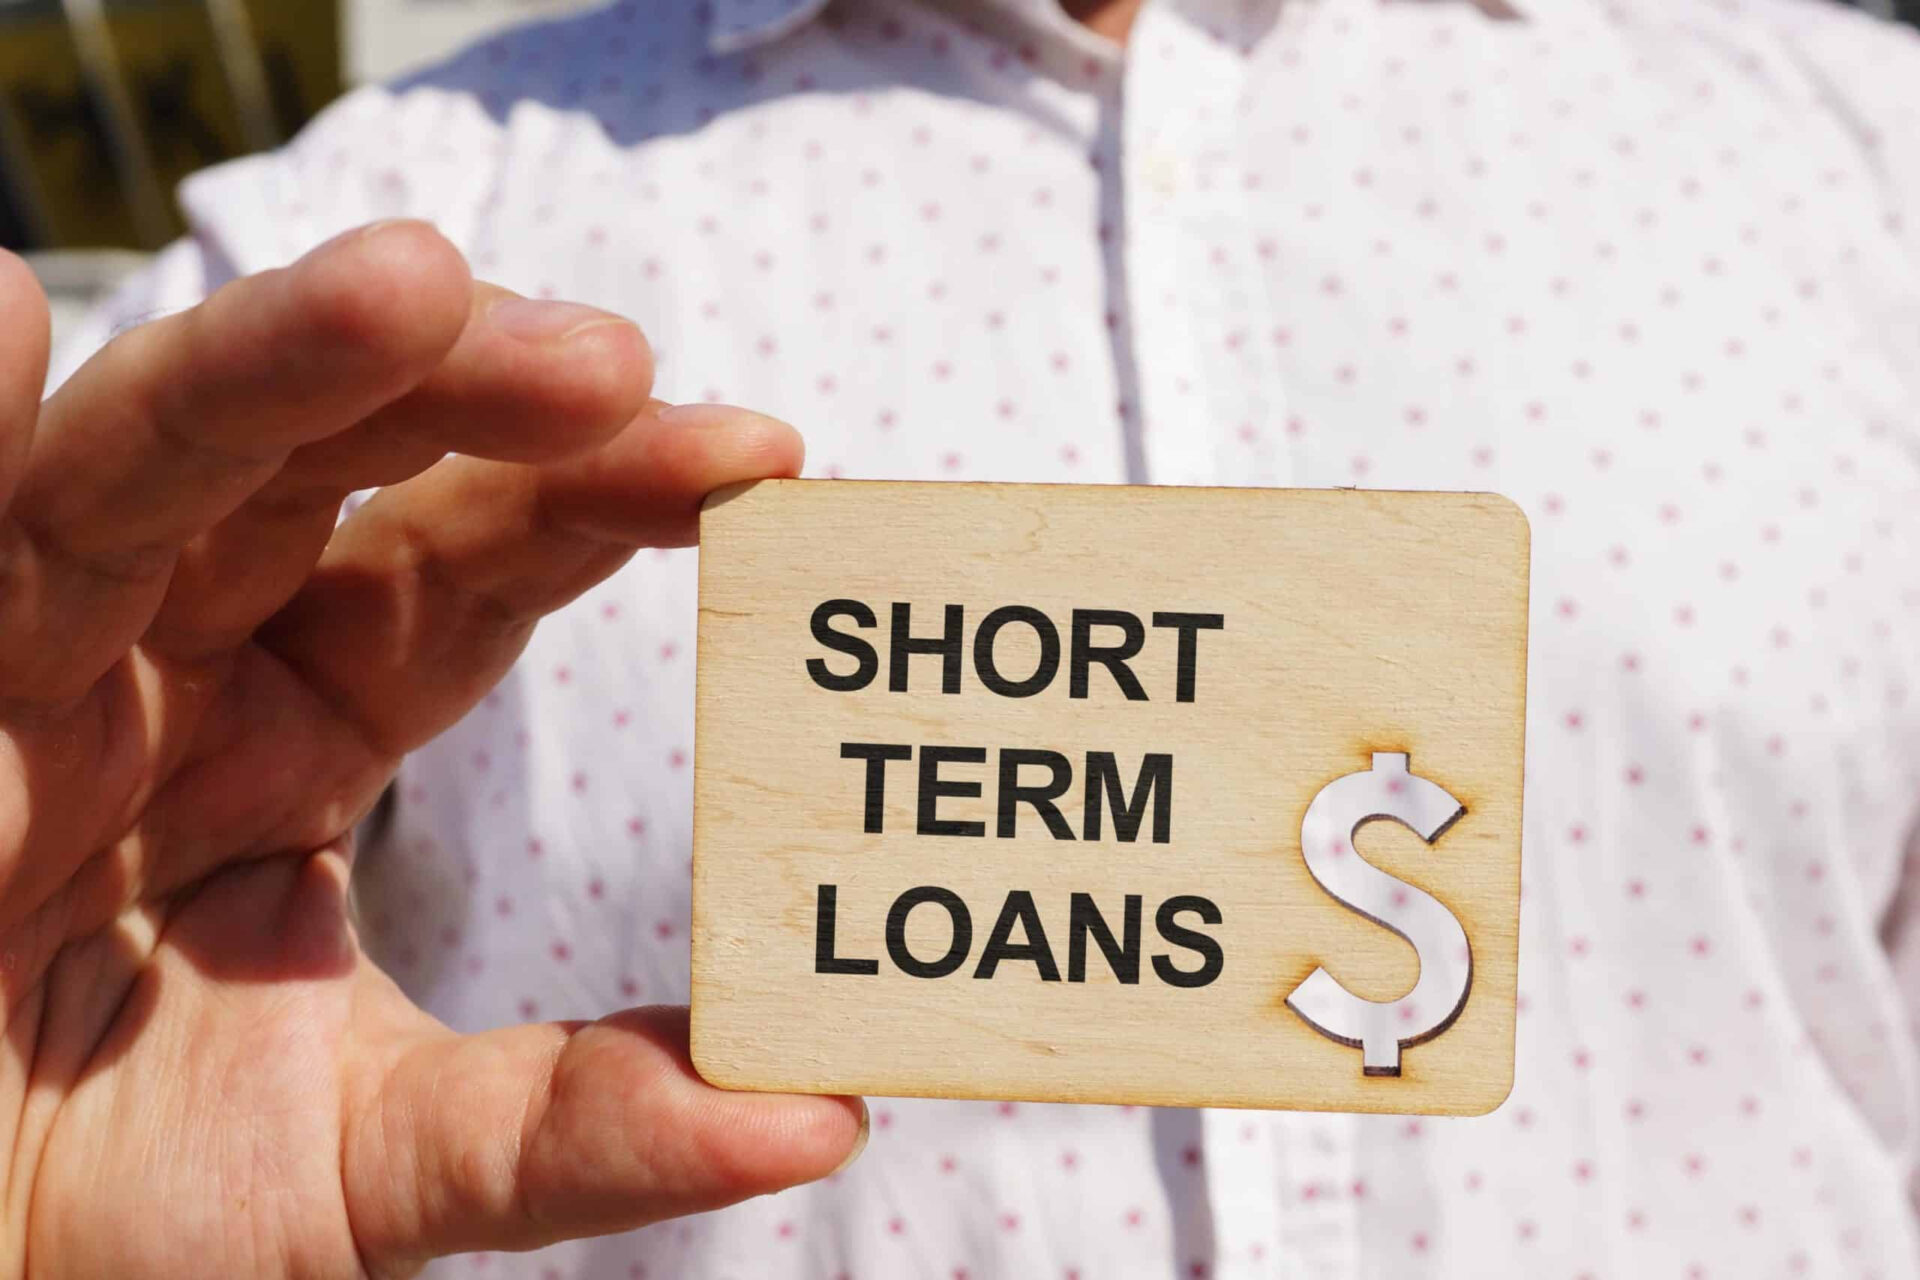 Fast short-term business loans: A Guide for the General Public